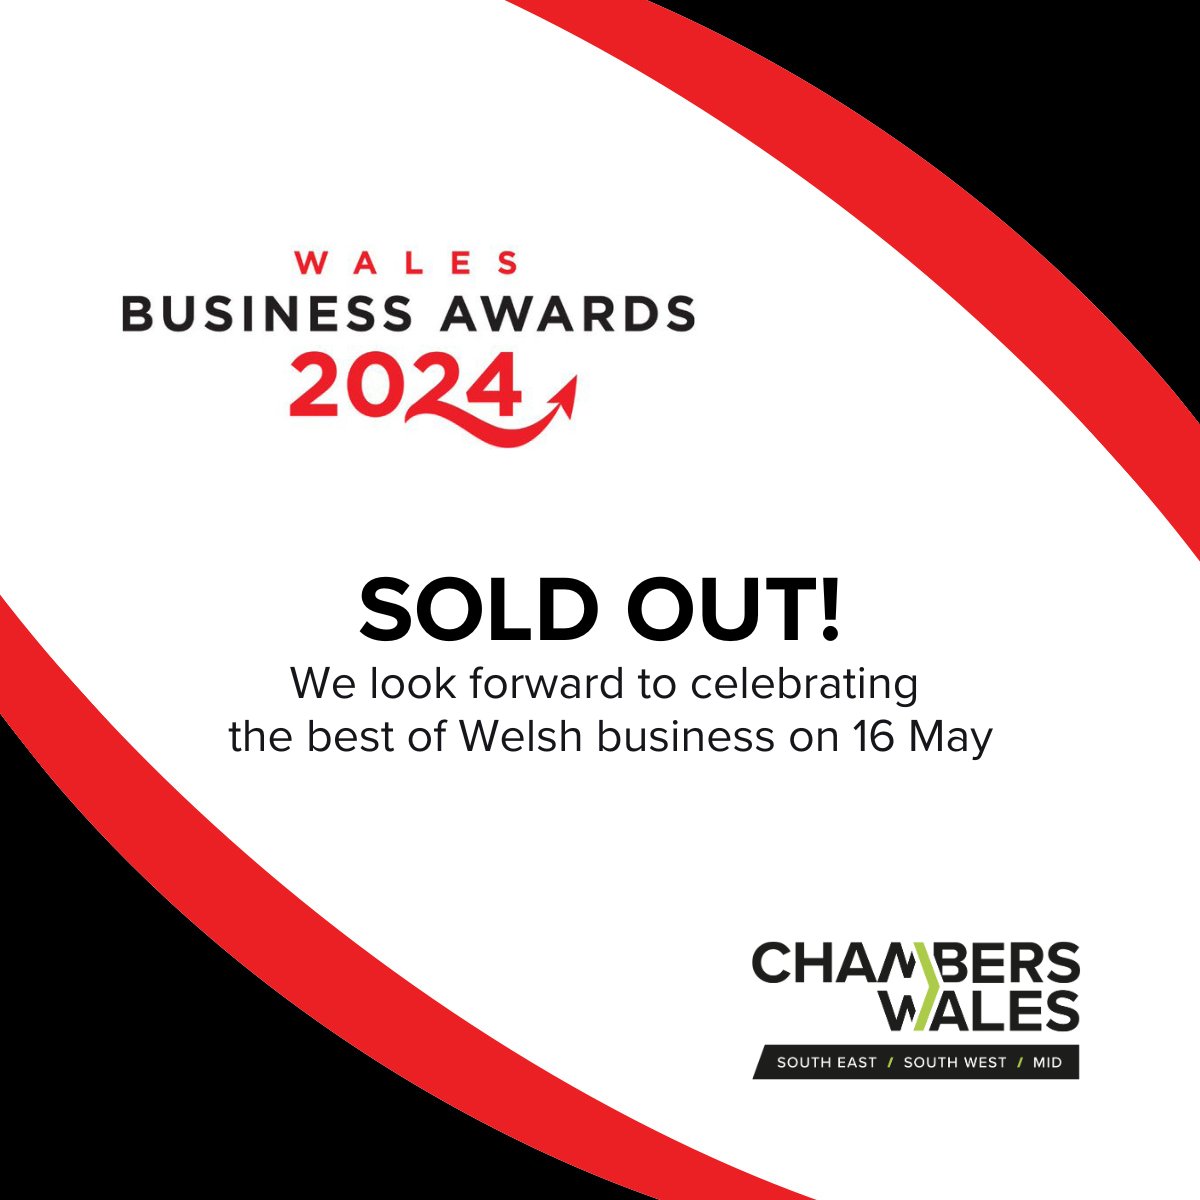 The Wales Business Awards ceremony is now sold out! We look forward to seeing everyone next Thursday evening and celebrating the best of Welsh business 🏆 #WBA2024